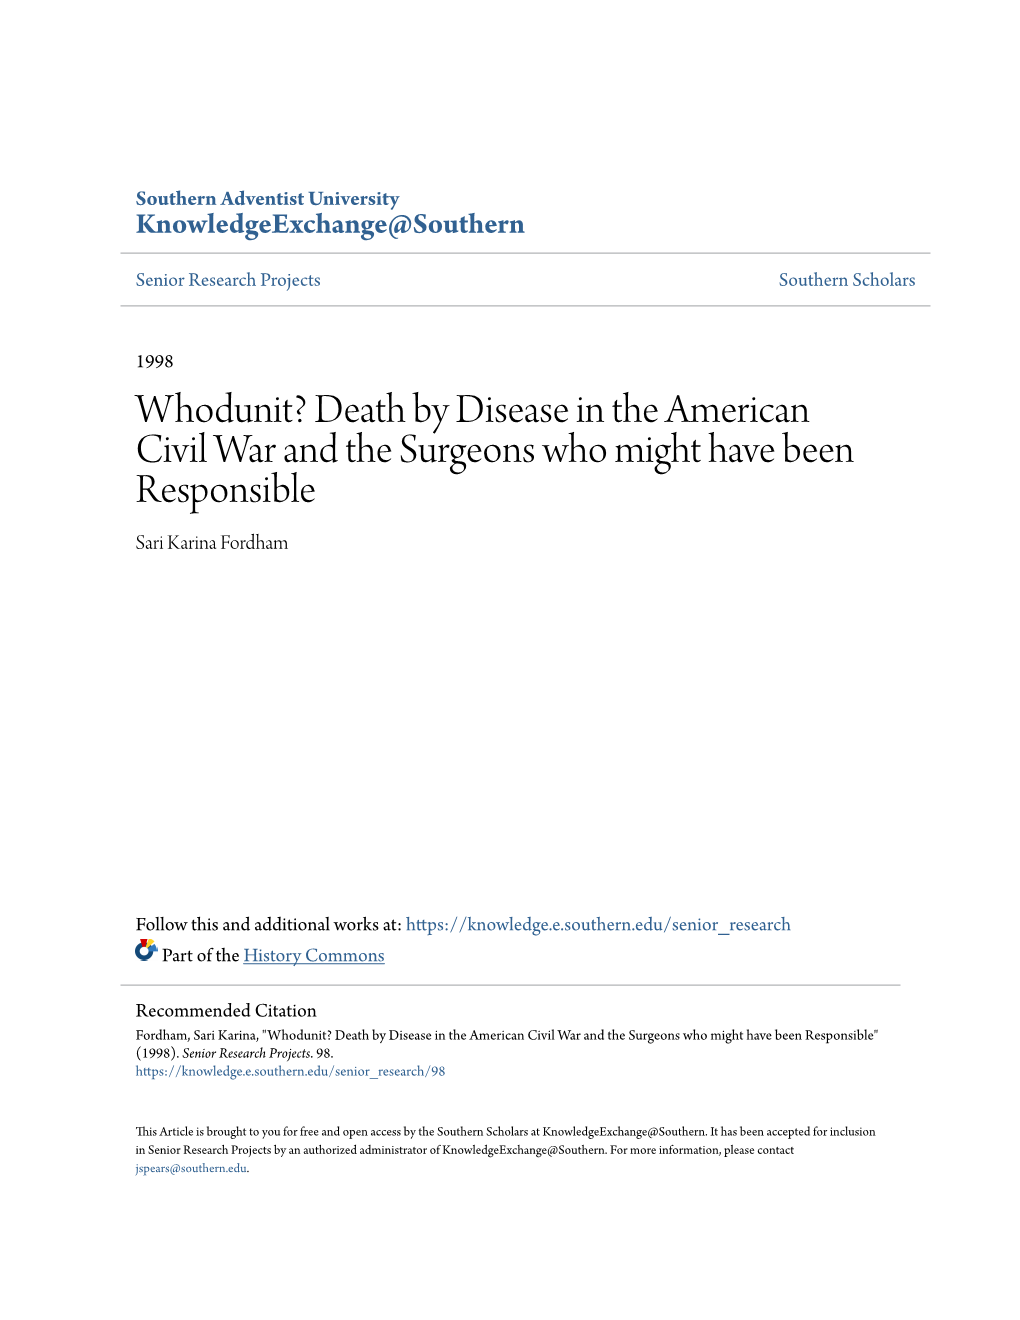 Death by Disease in the American Civil War and the Surgeons Who Might Have Been Responsible Sari Karina Fordham